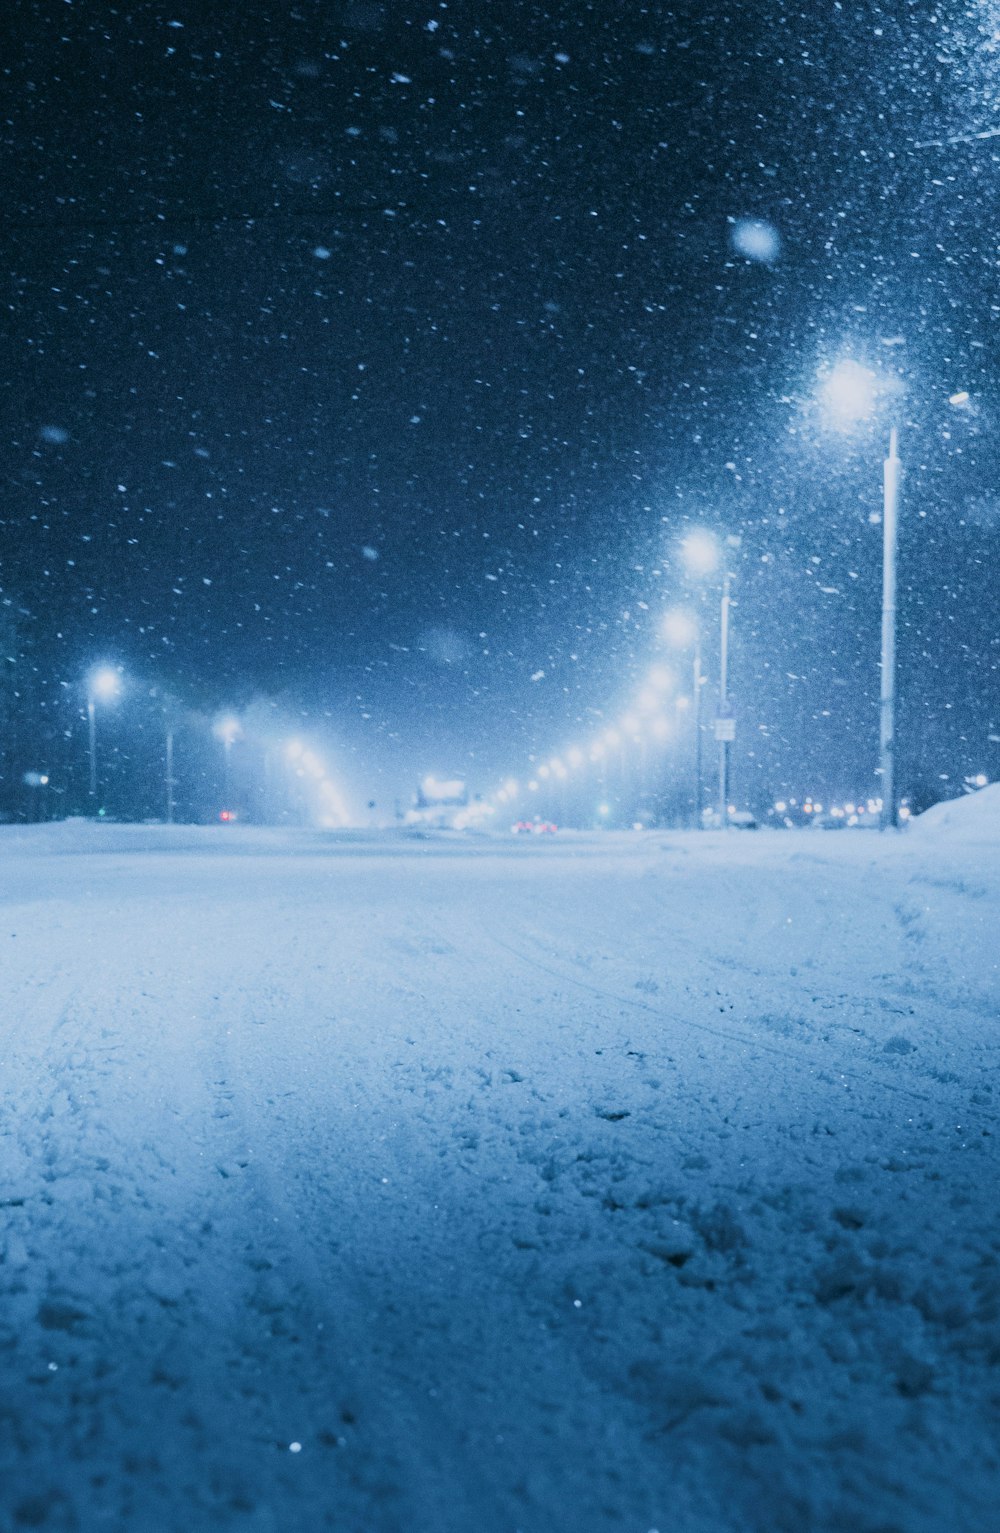 a snow covered street at night with street lights